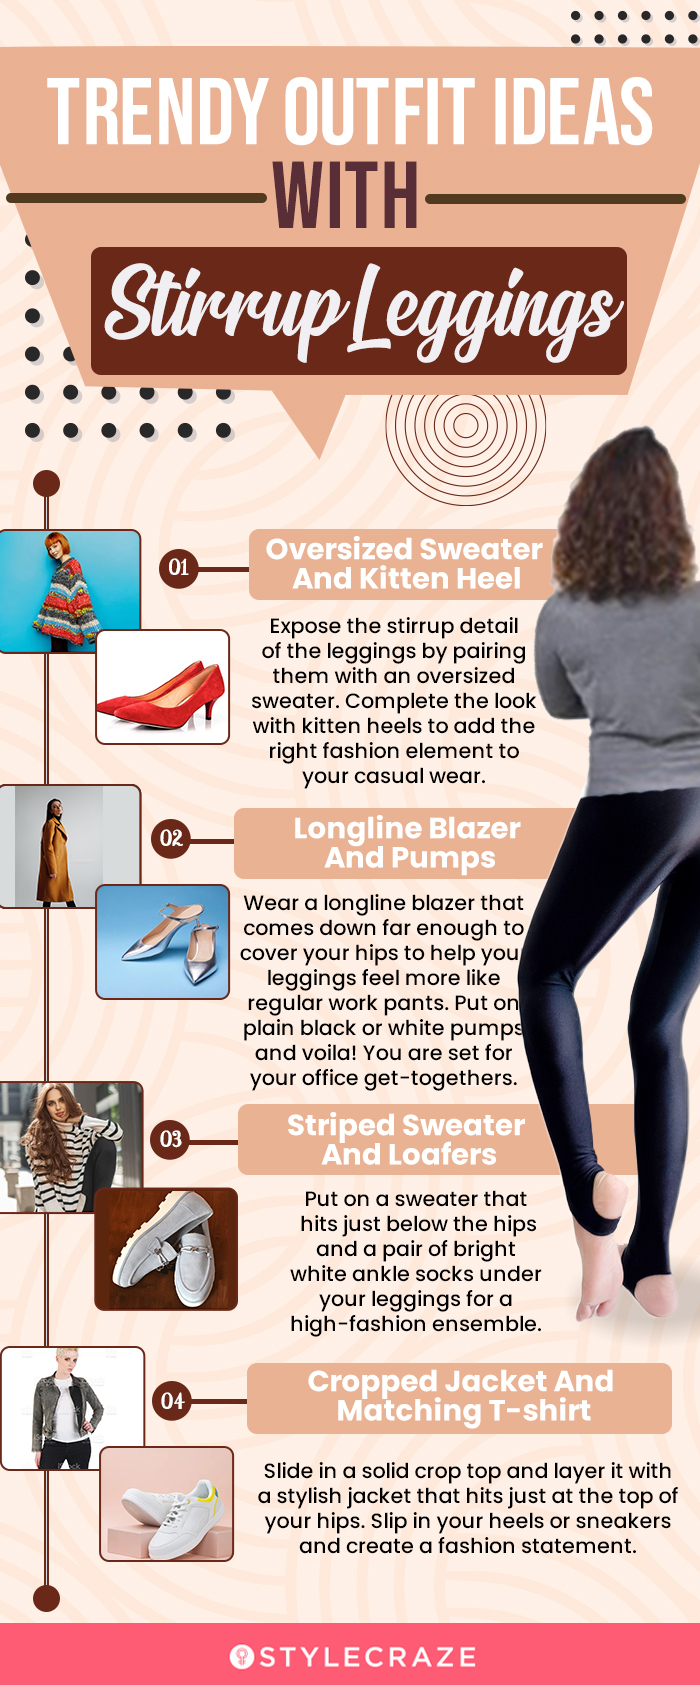 Trendy Outfit Ideas With Stirrup Leggings (infographic)